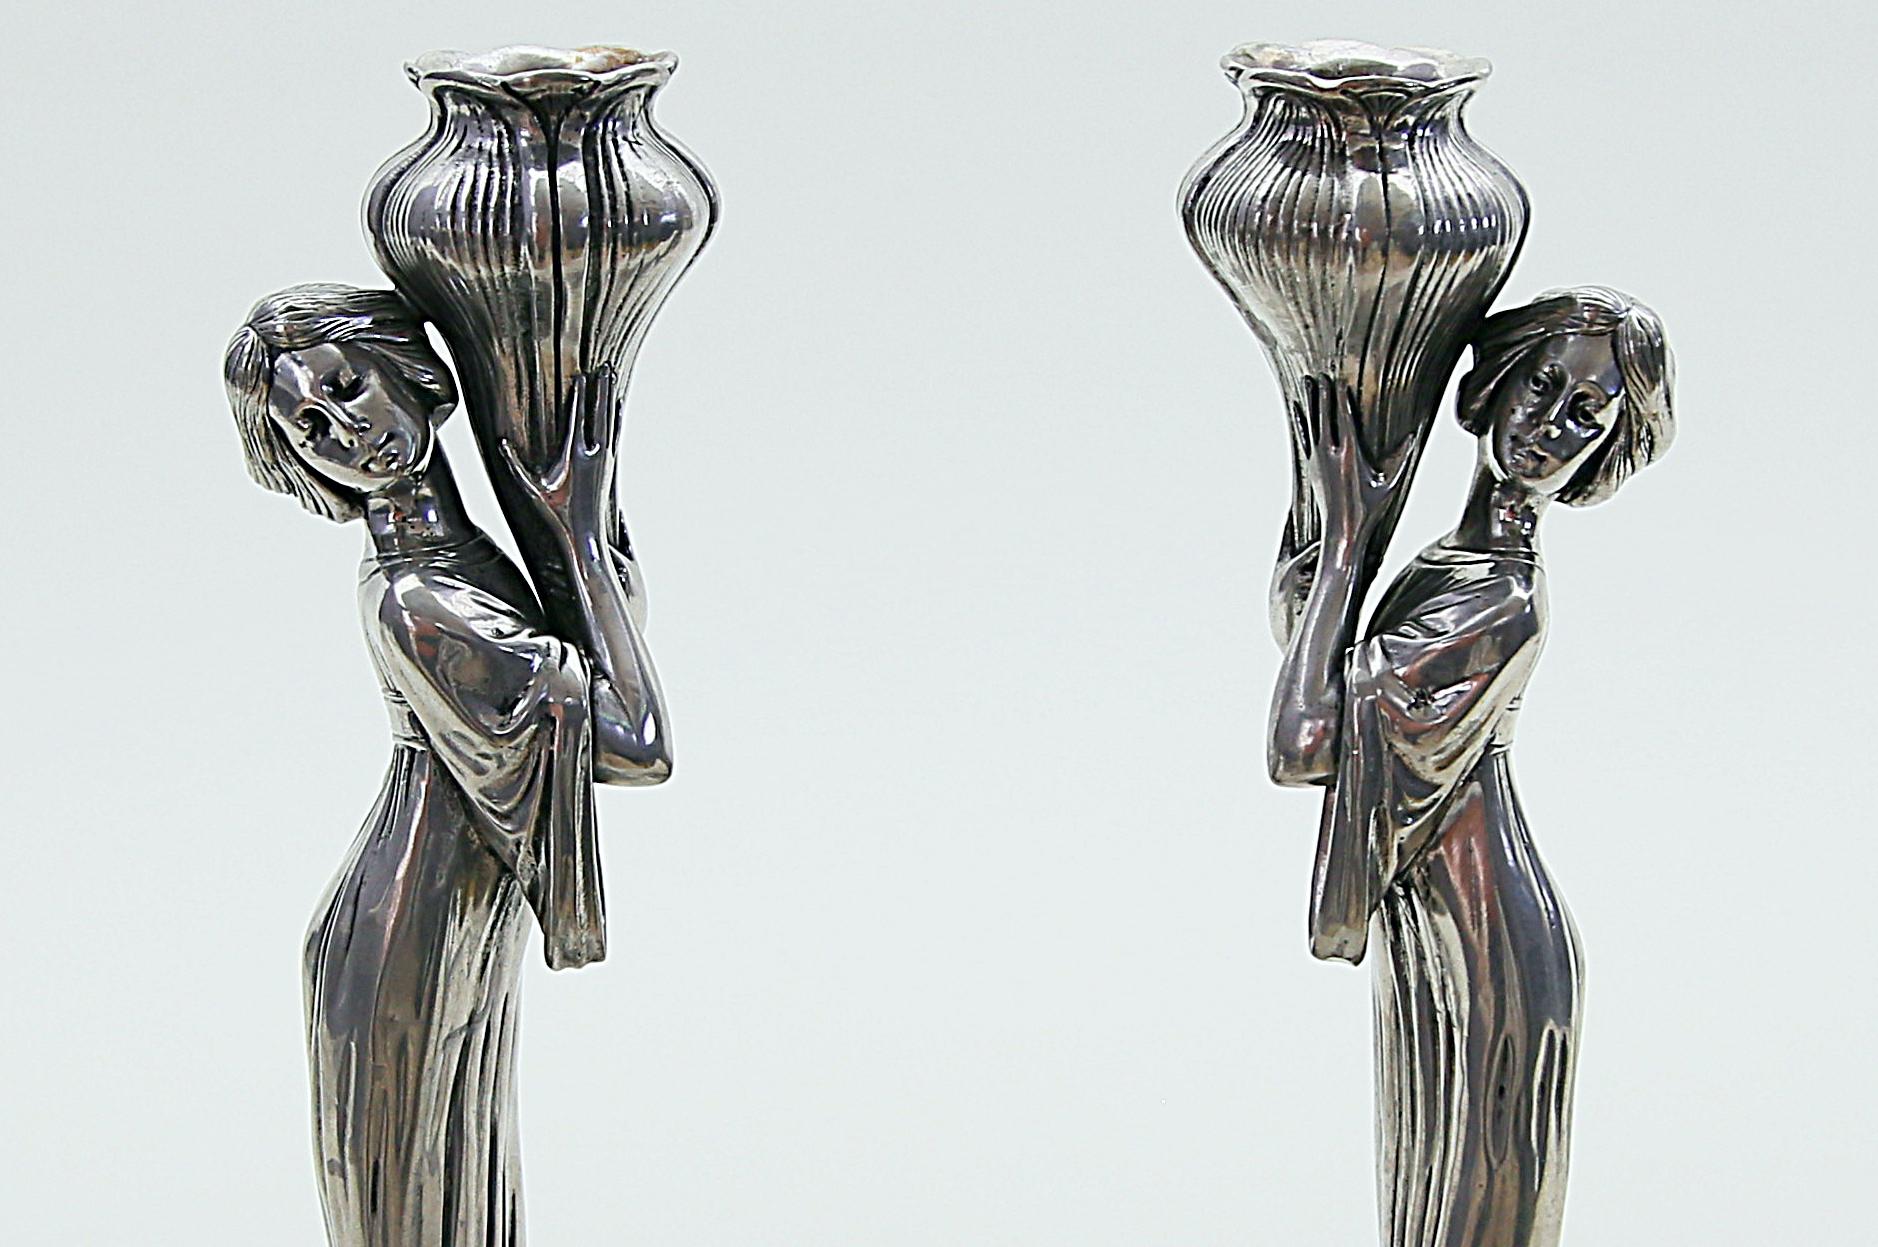 Italian Pair of Candlesticks by Achille Gamba, Italy, First Half of the 20th Century